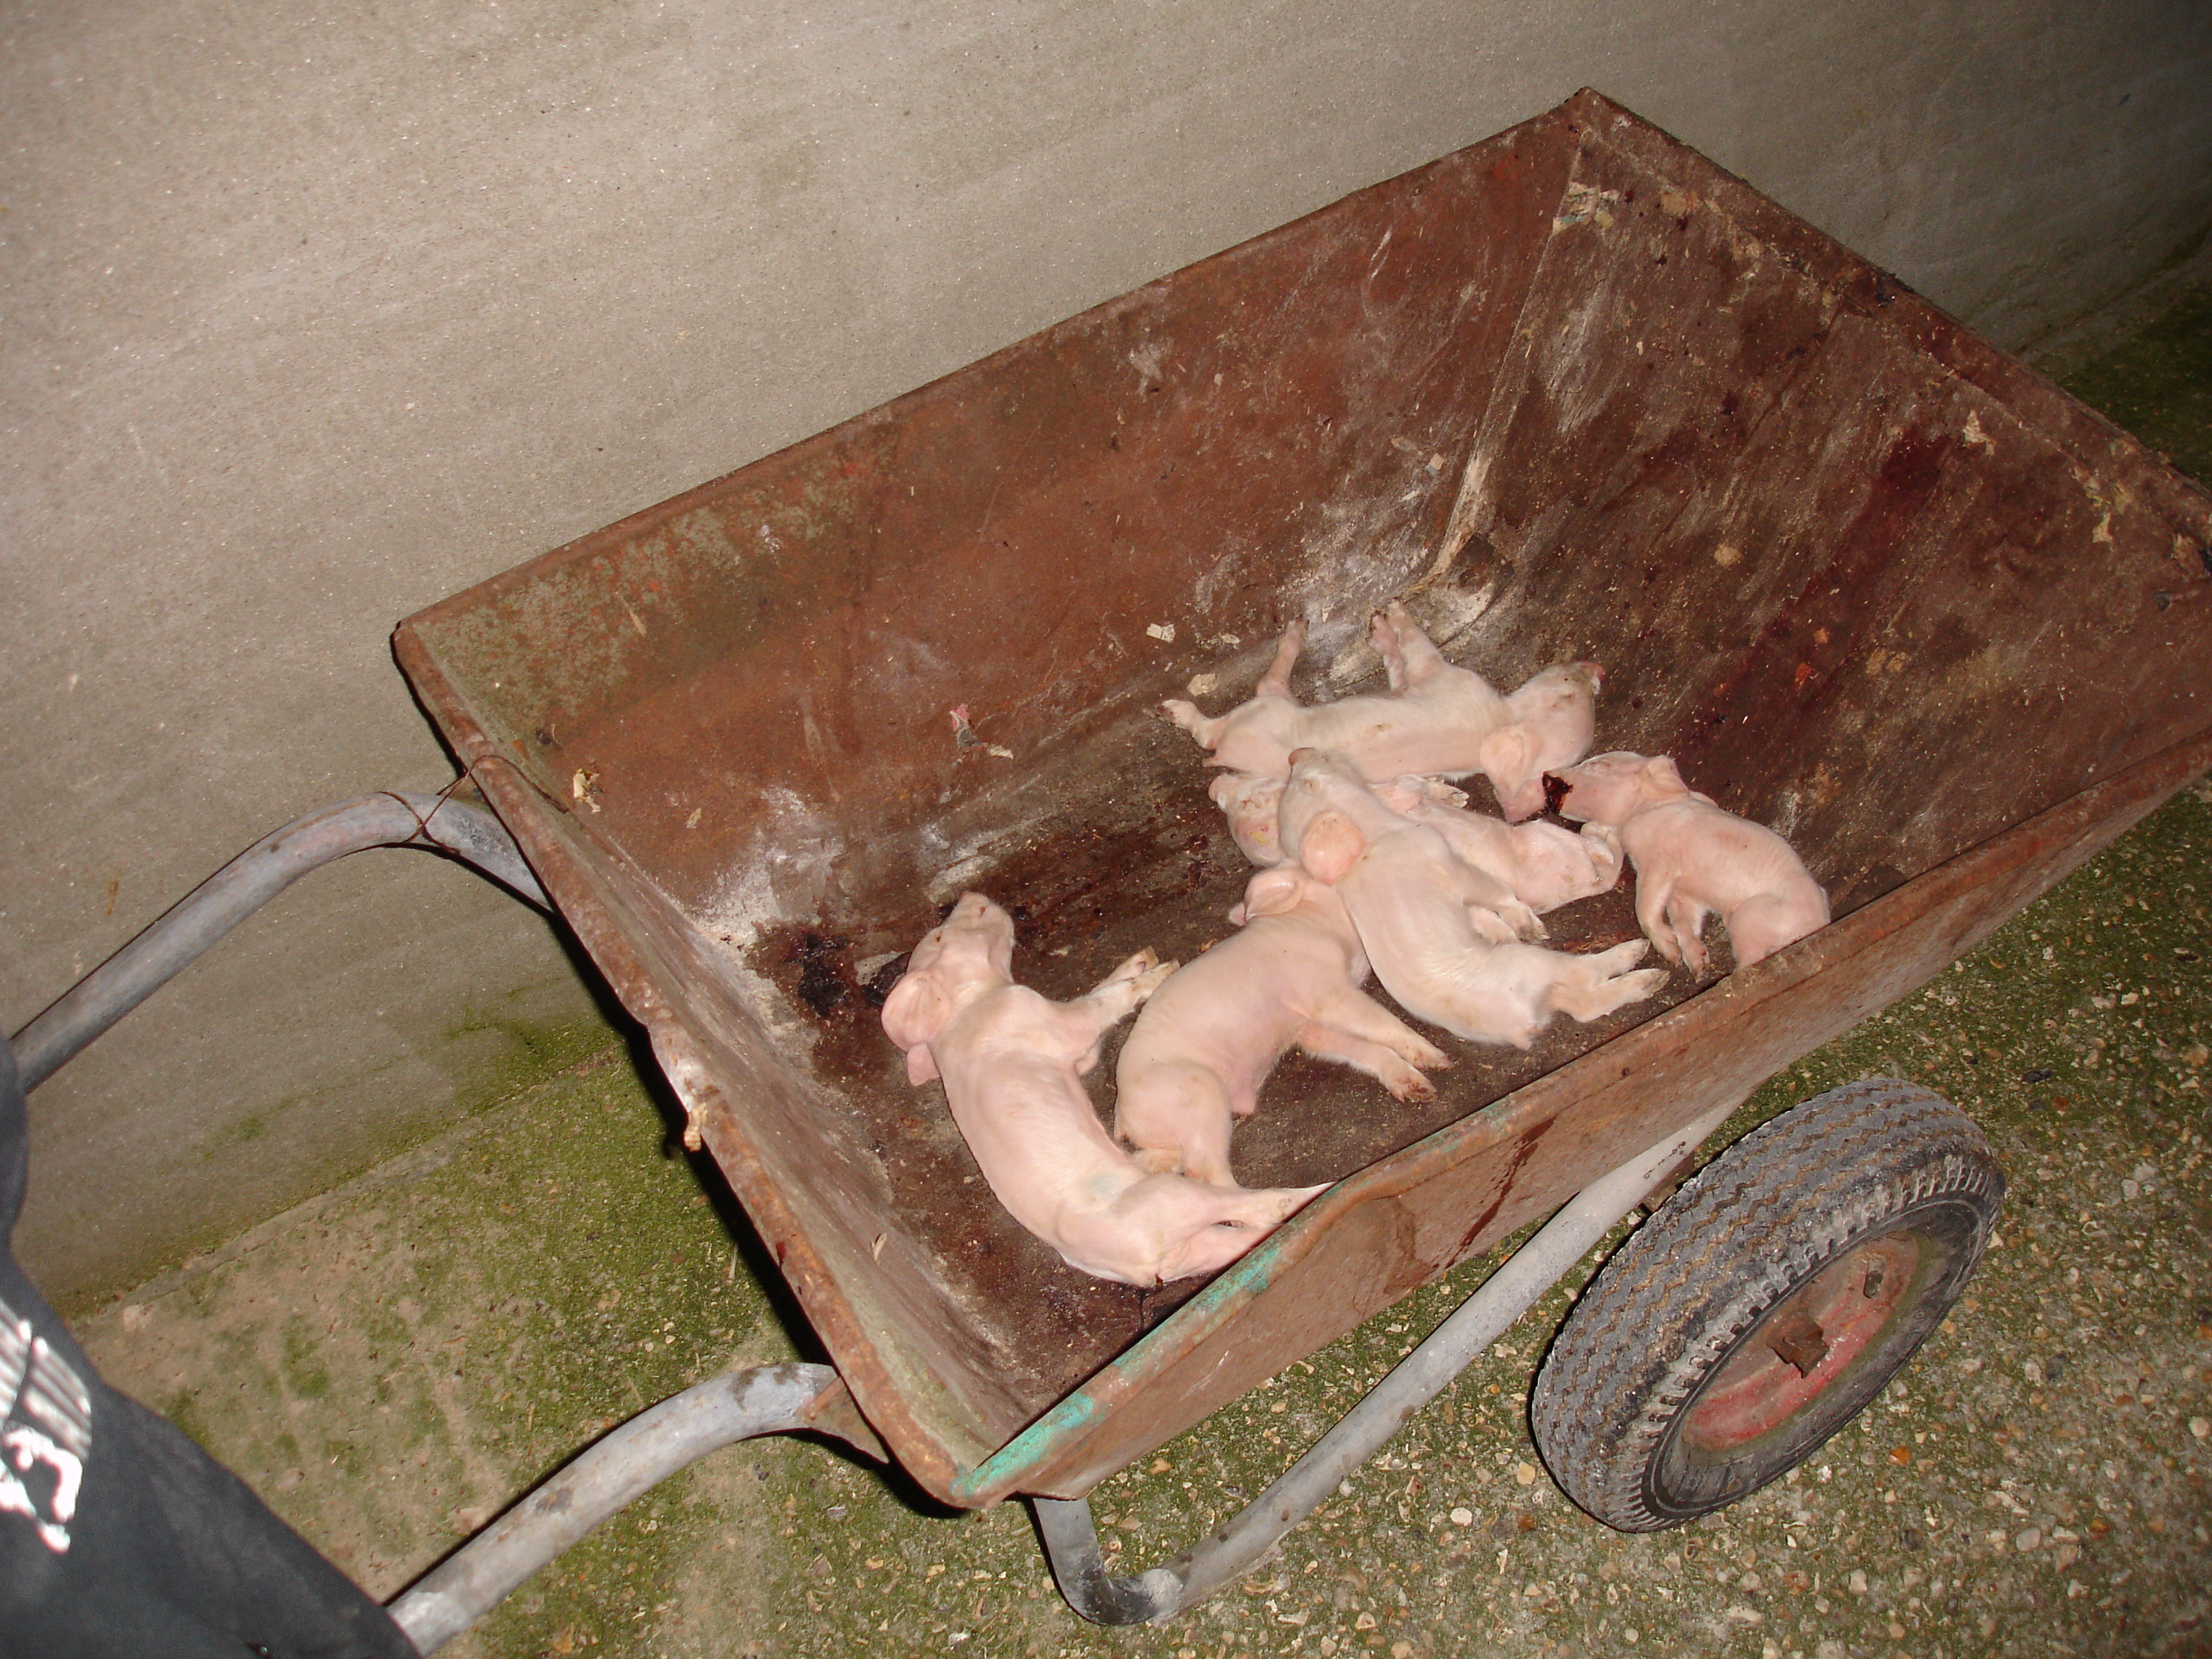 Dead and abandoned piglets